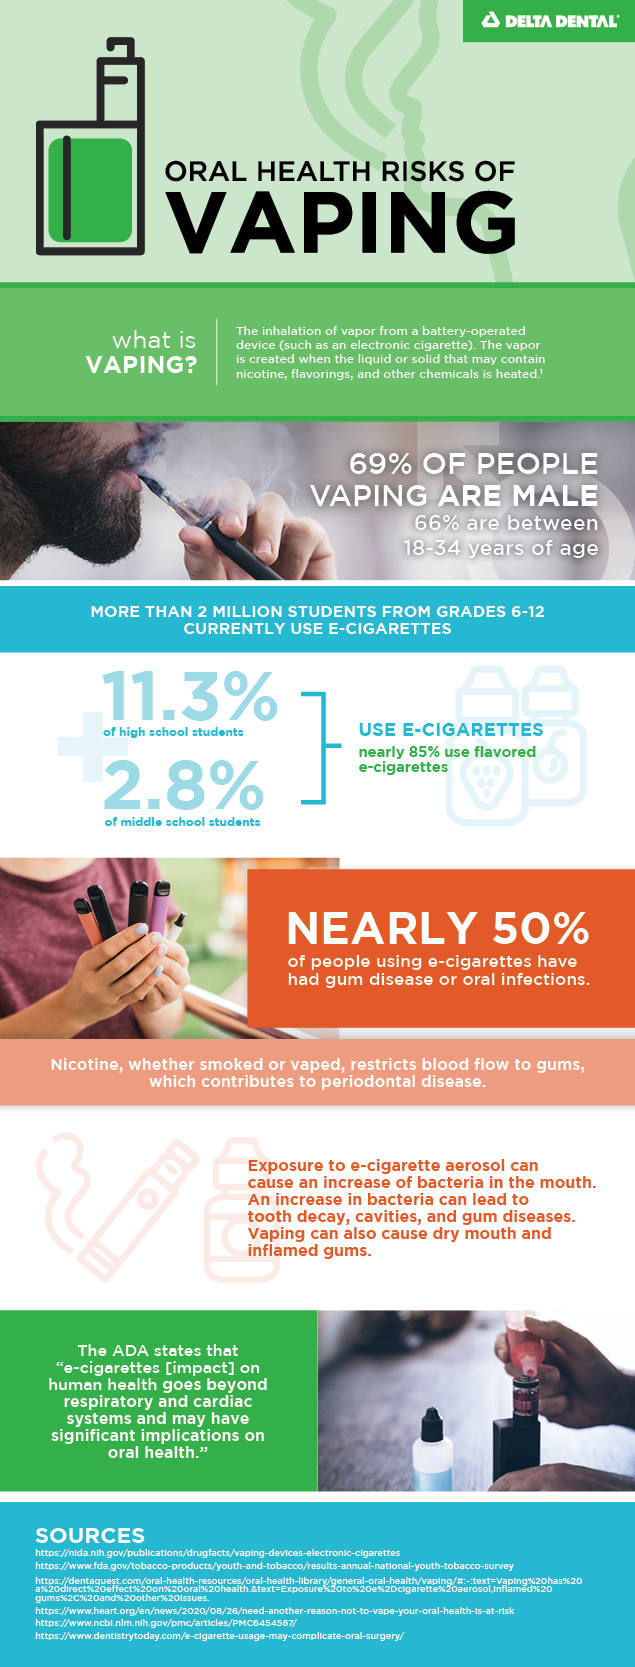 The use of an e-cigarette is often called “vaping,” but “vaping” can also refer to a marijuana vaporizer pen. Check out this infographic to learn how it damages both our oral and overall health